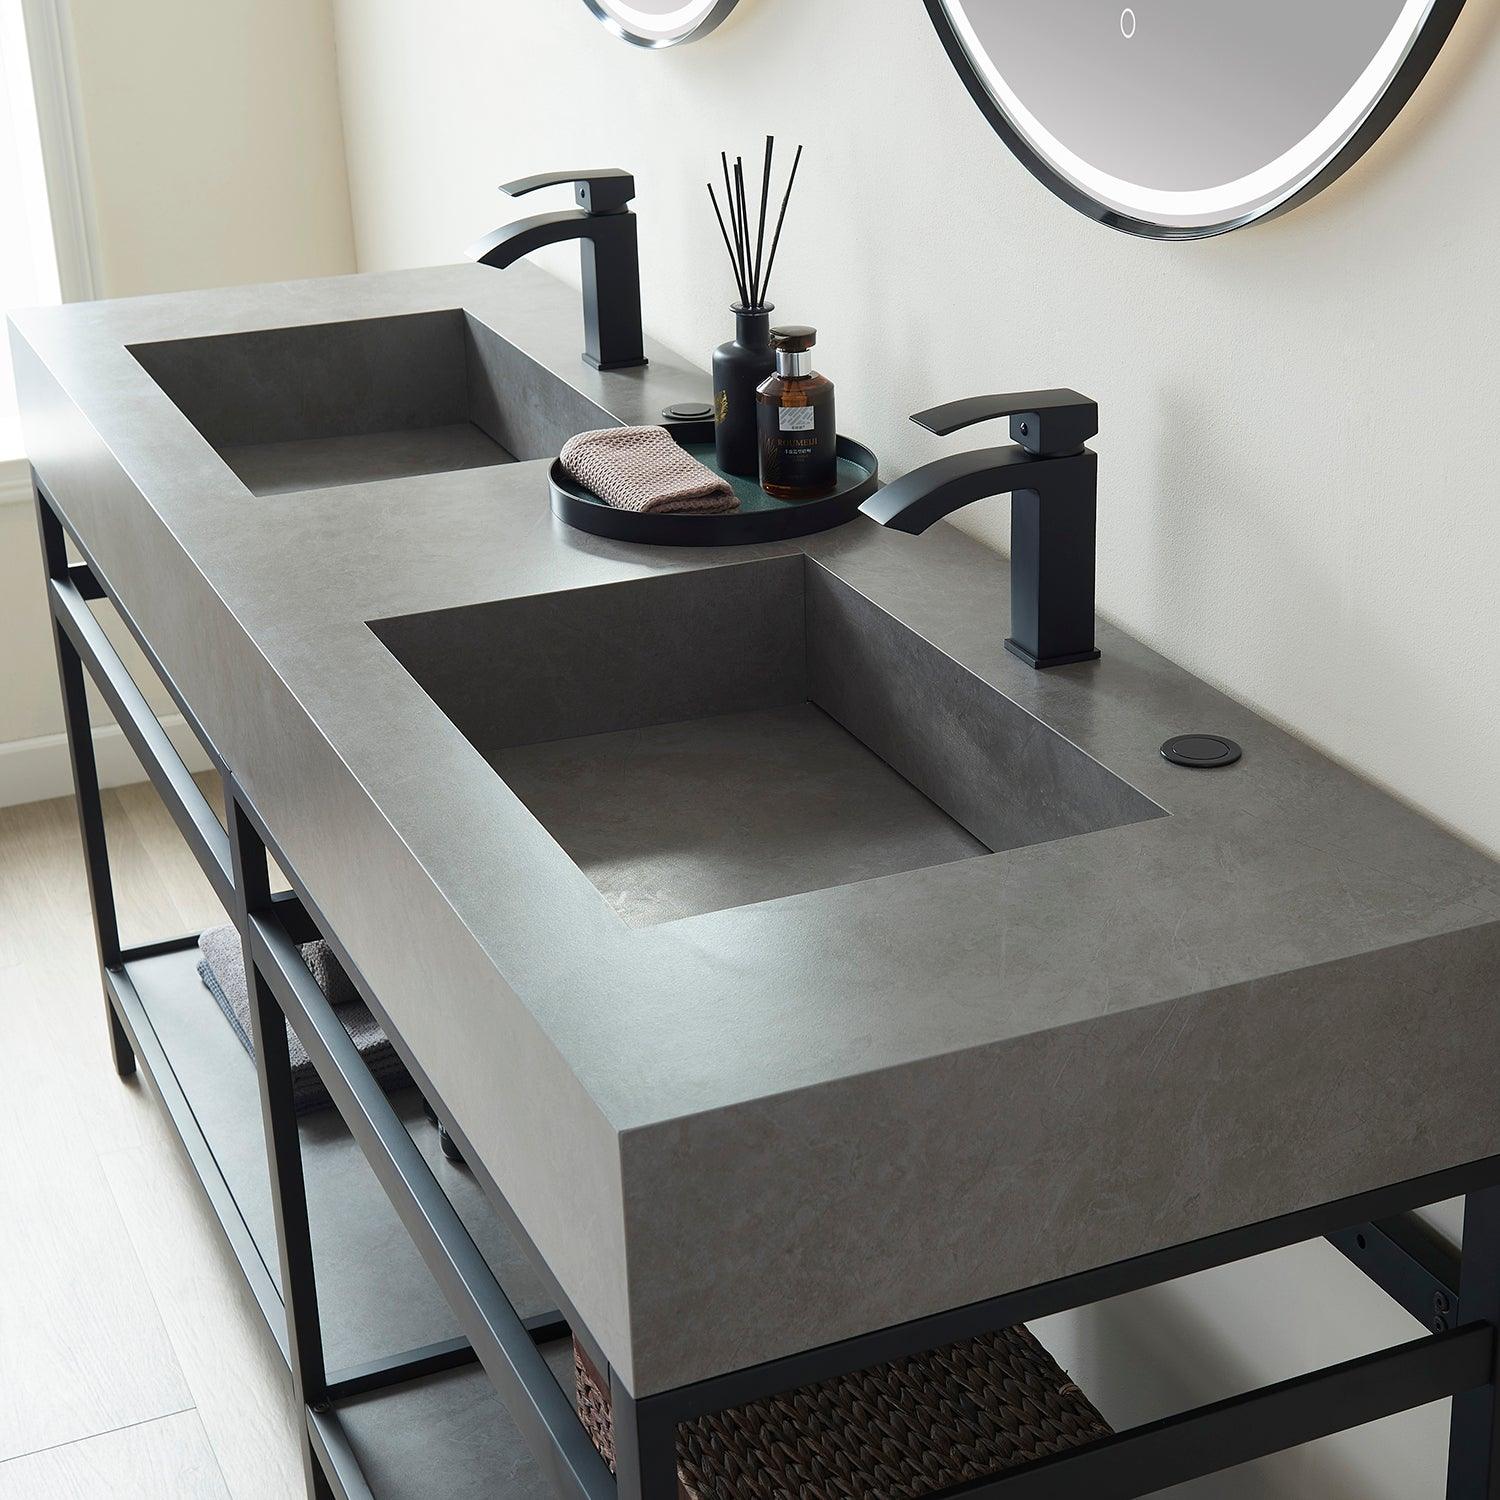 
  
  Vinnova Bilbao Double Vanity with Matte black stainless steel bracket match with Grey Sintered Stone Top and Optional Mirror
  
